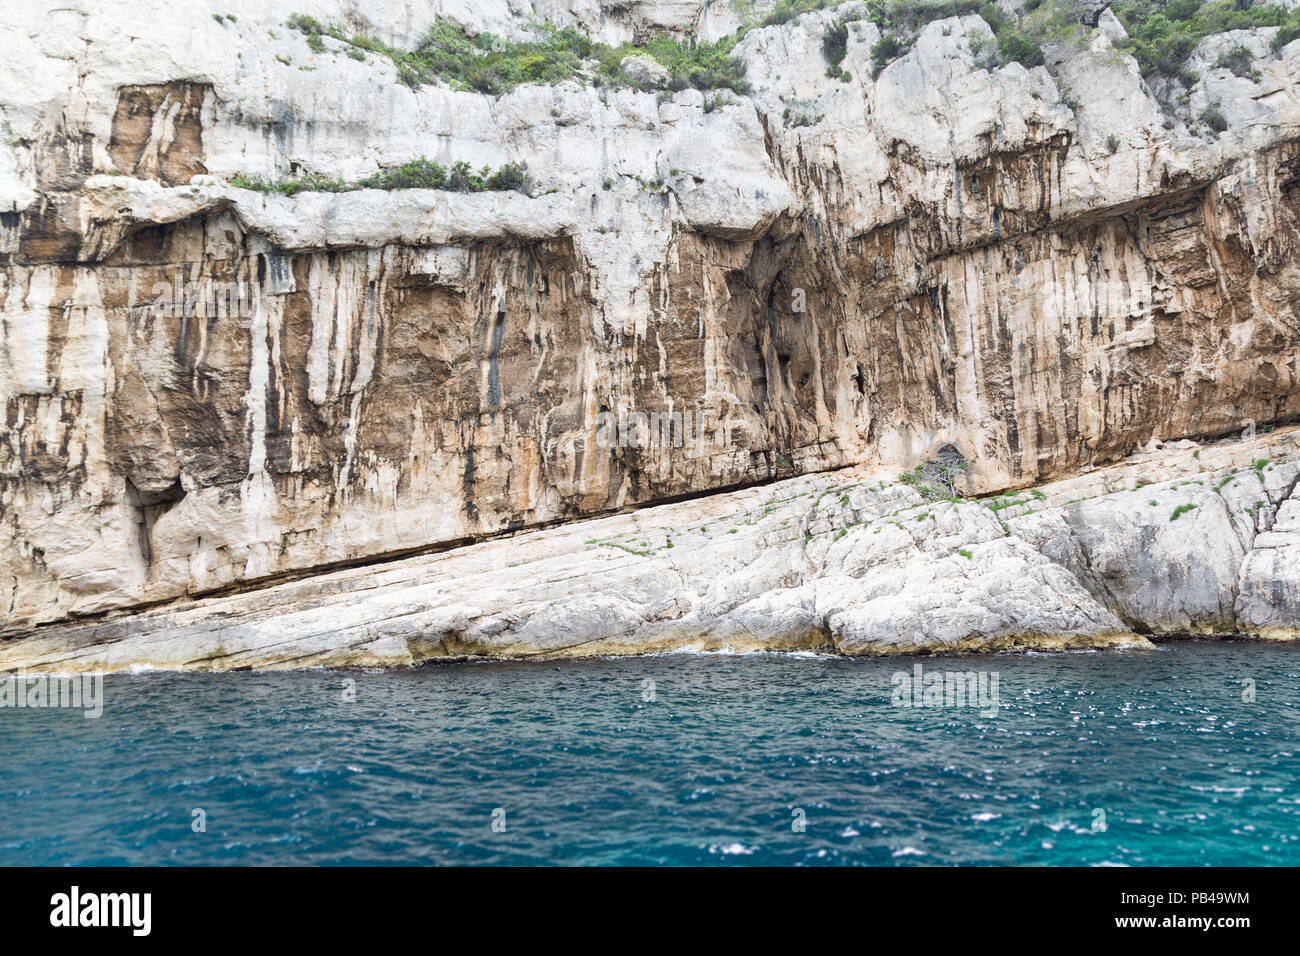 Wall of the famous stone bays (calanques) near Cassis in Provence, France Stock Photo